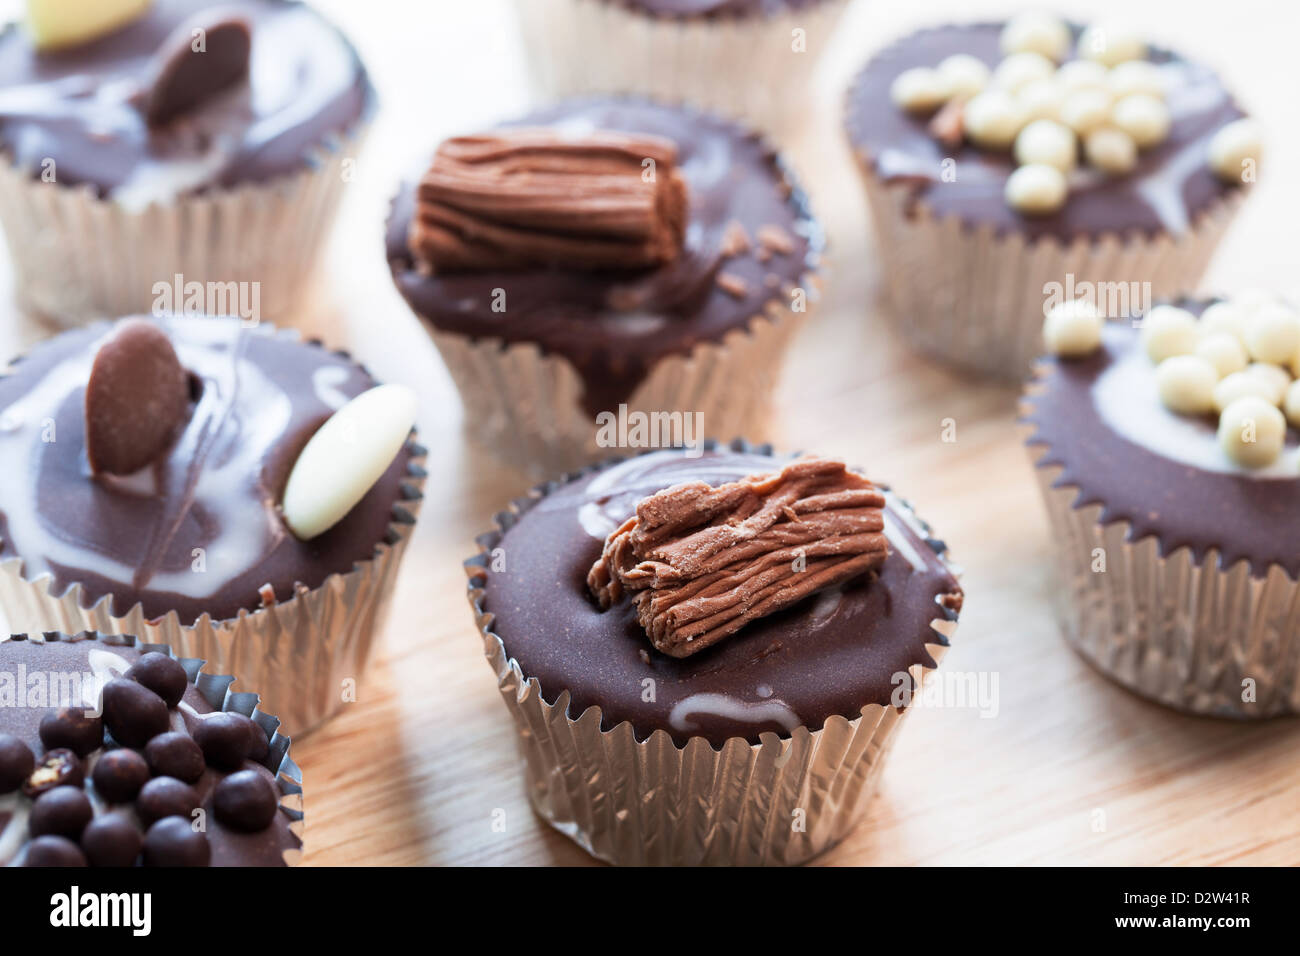 Gourmet chocolate cupcakes in silver cupcake wrappers Stock Photo